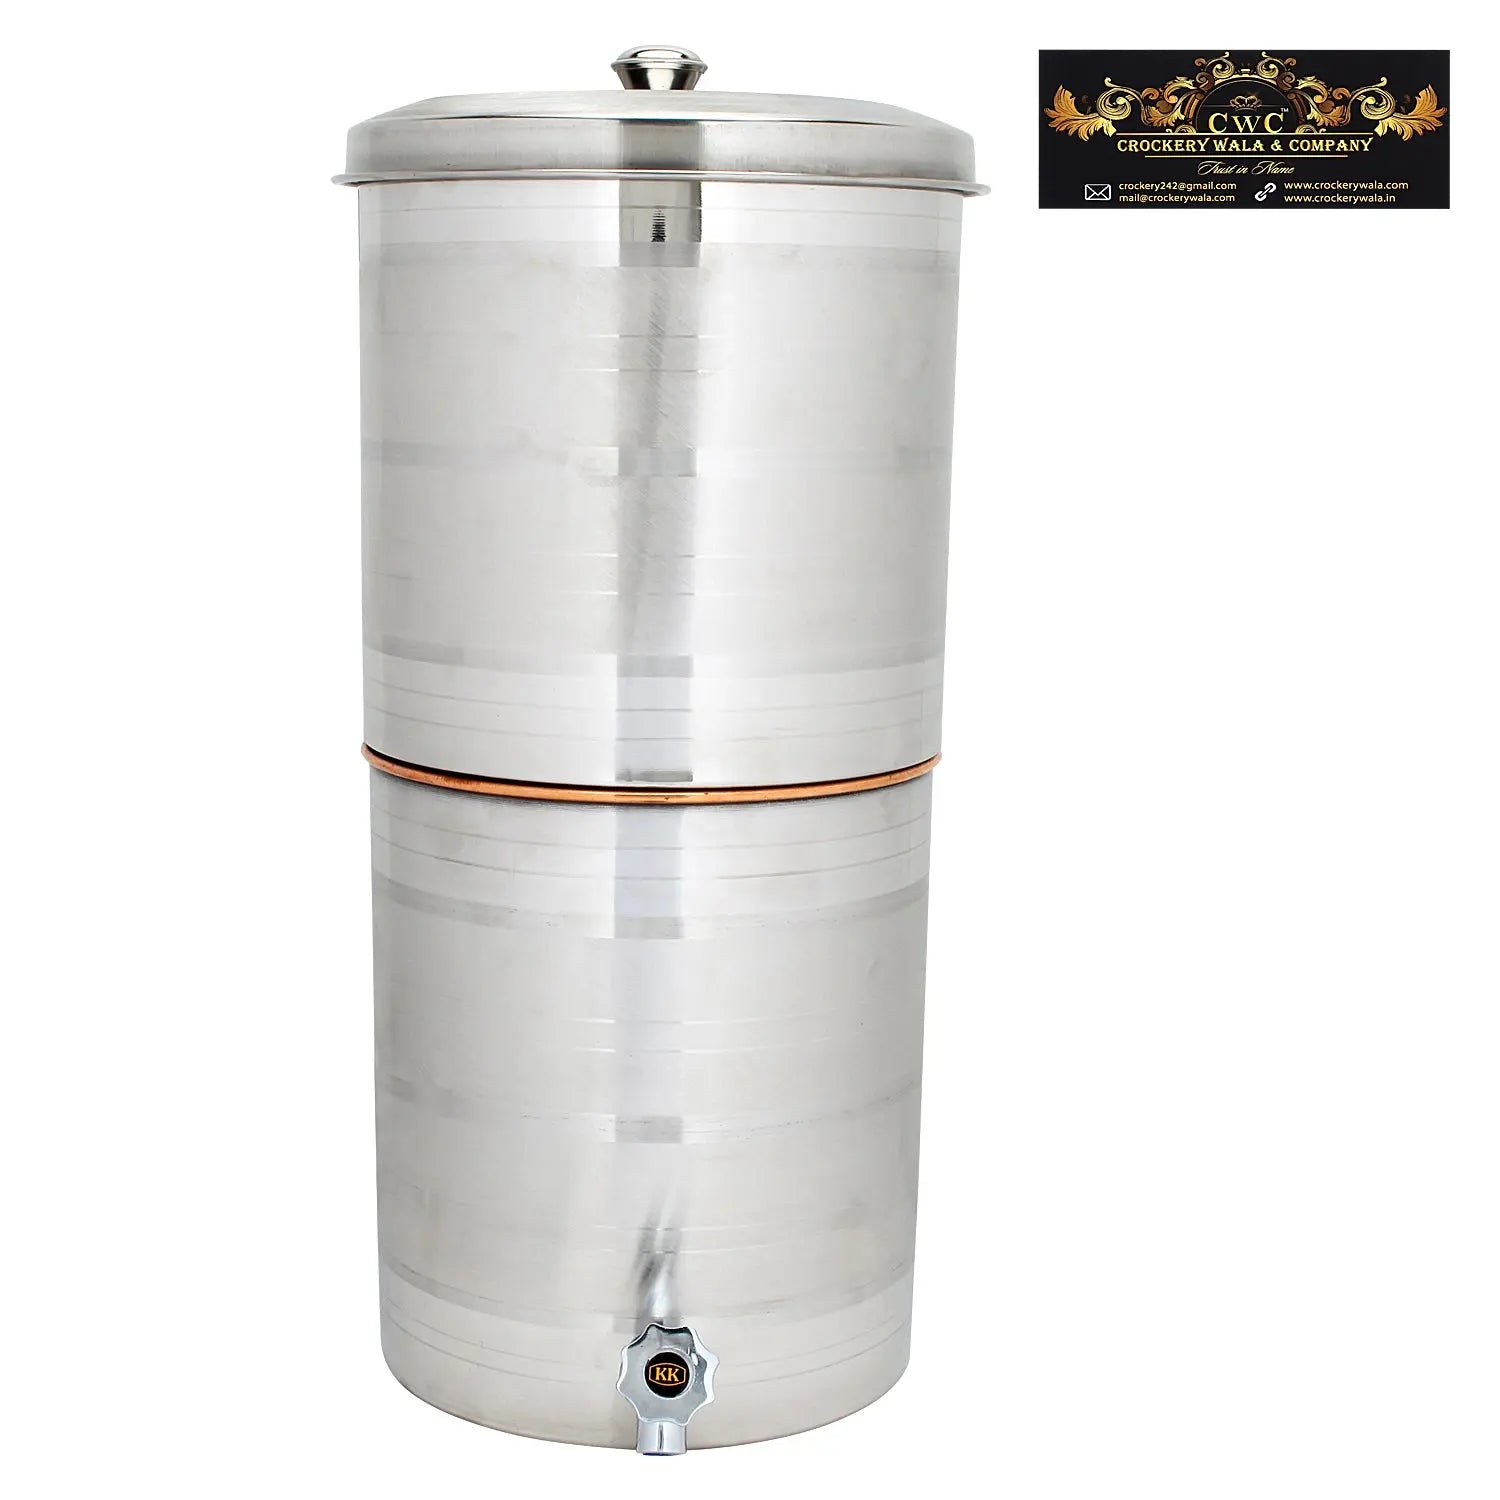 Copper Water Filter With Inner Copper & Outer Steel - CROCKERY WALA AND COMPANY 